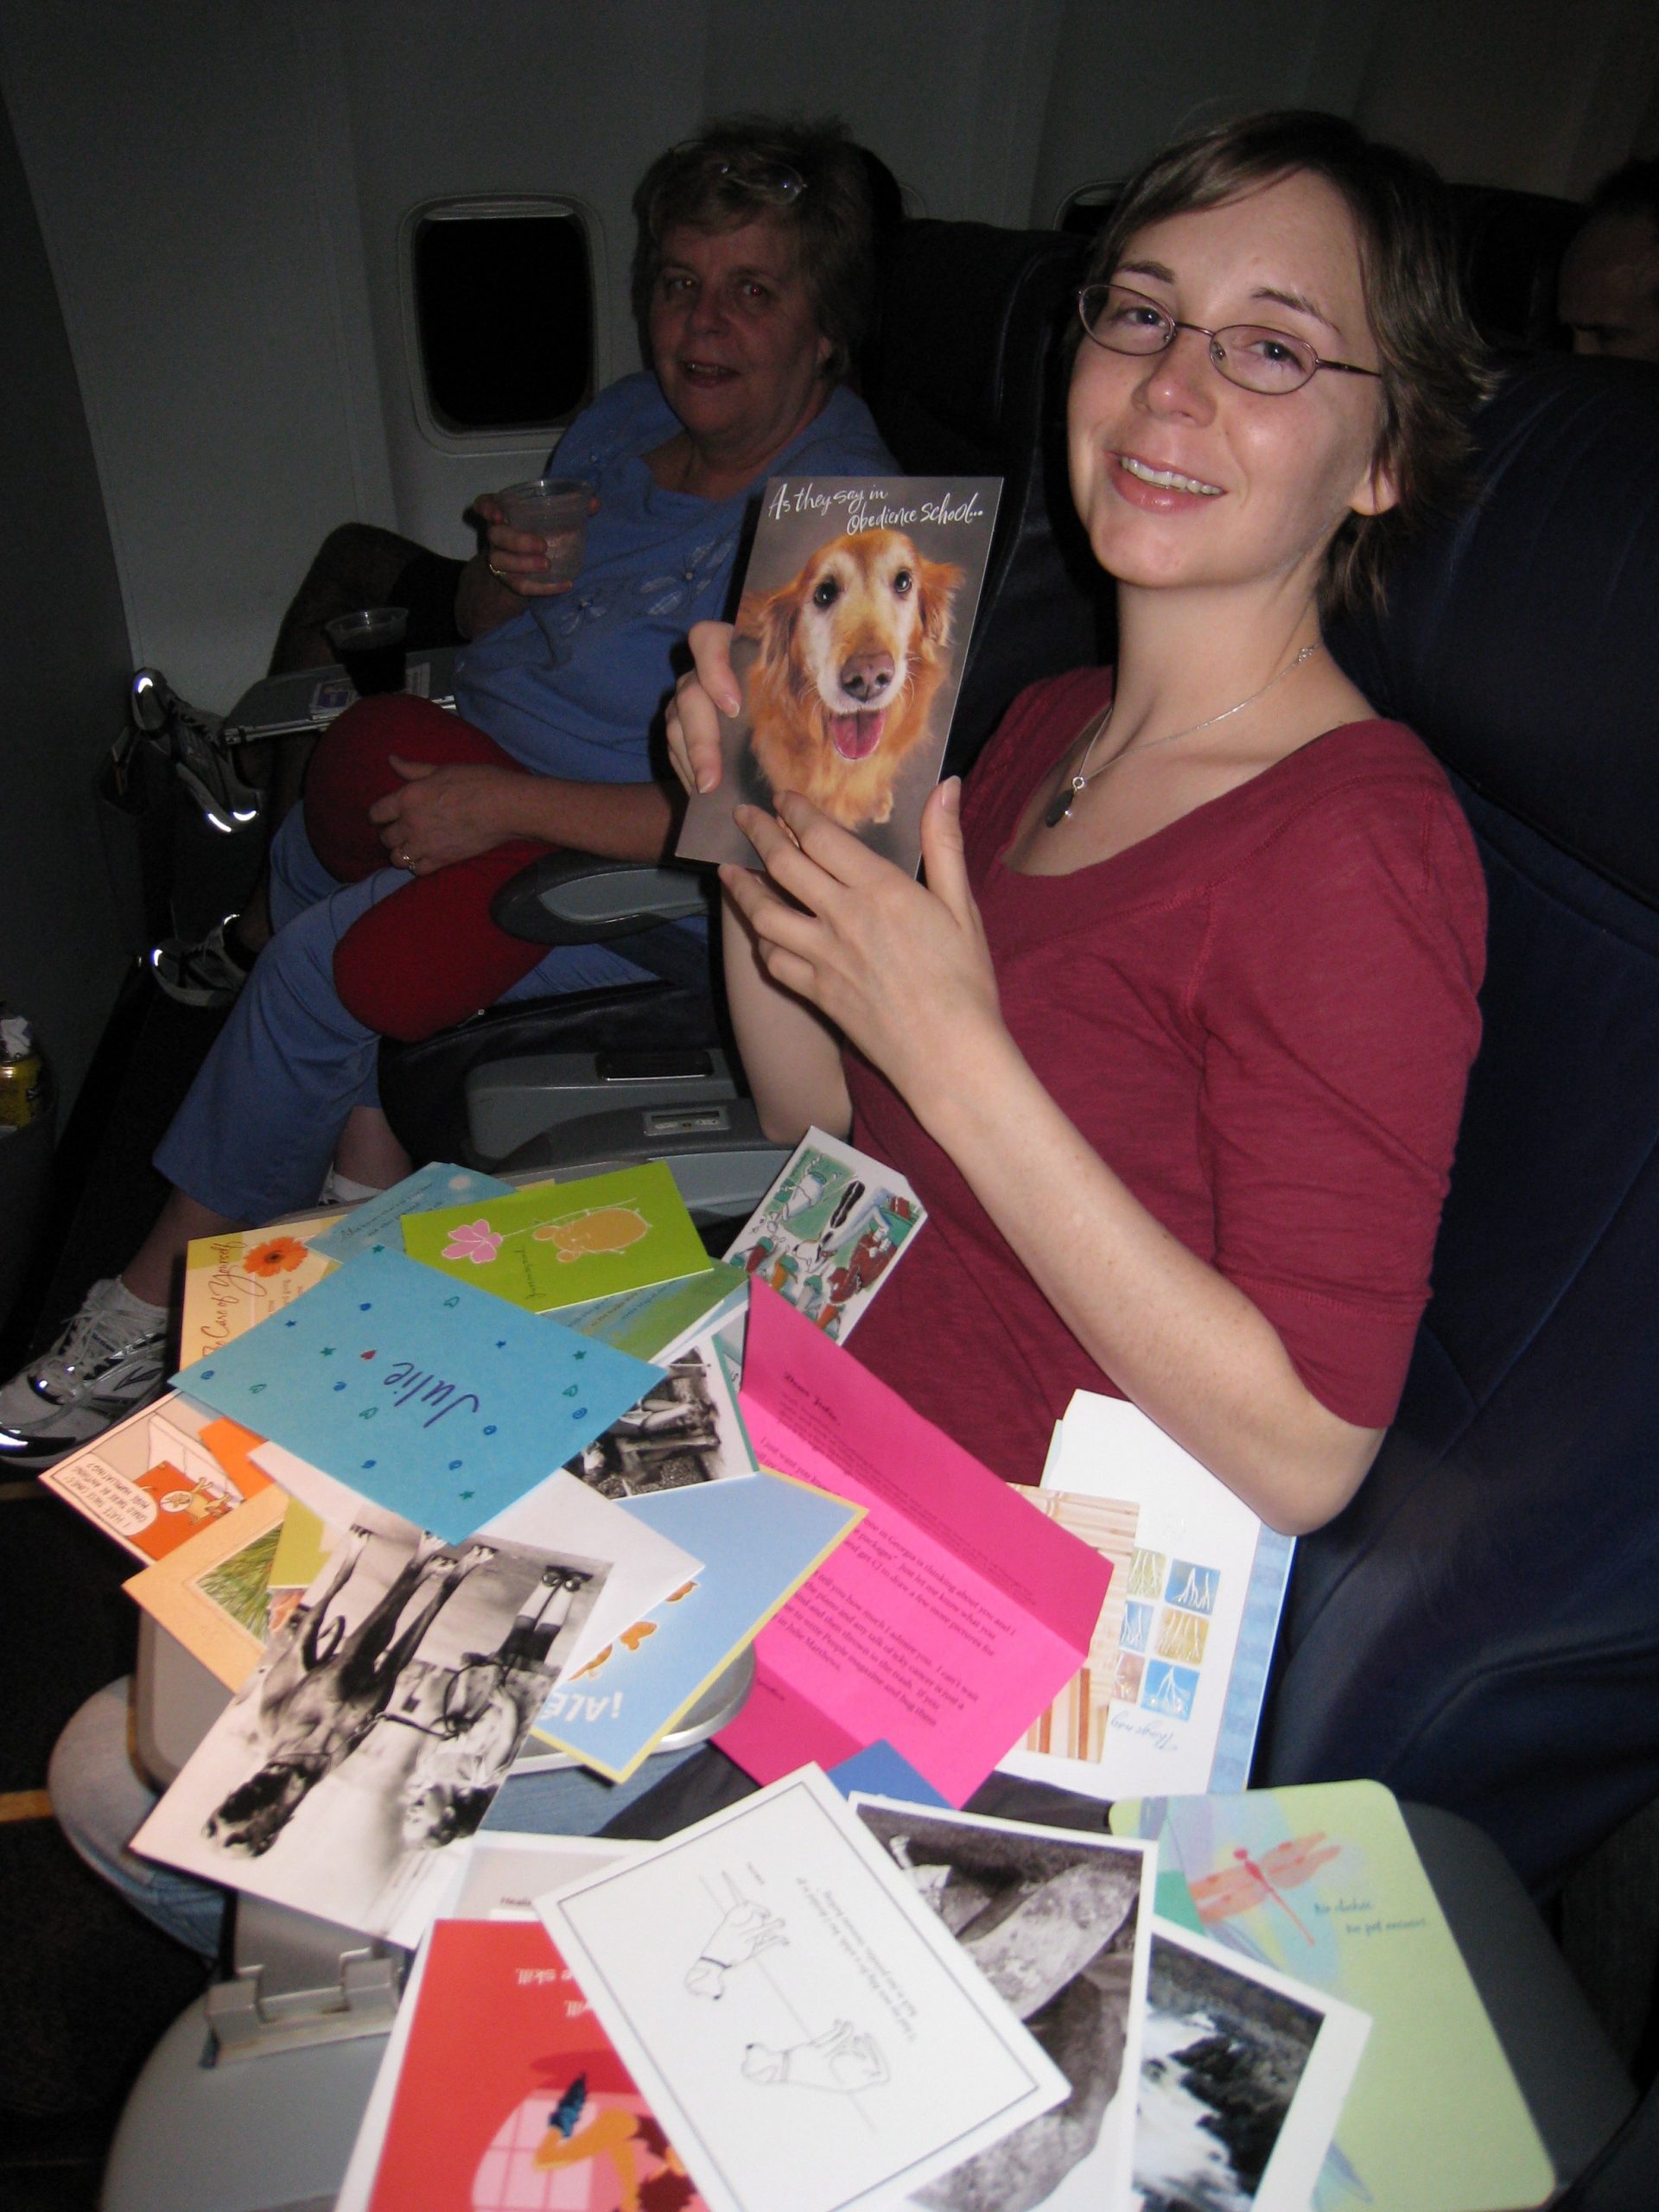 My sister surprised me by asking friends & family to send cards I could open on the flight out to Seattle, where I was heading for my stem cell transplant. Despite my sadness over leaving home and fear of what the future held, I couldn't help but smile.